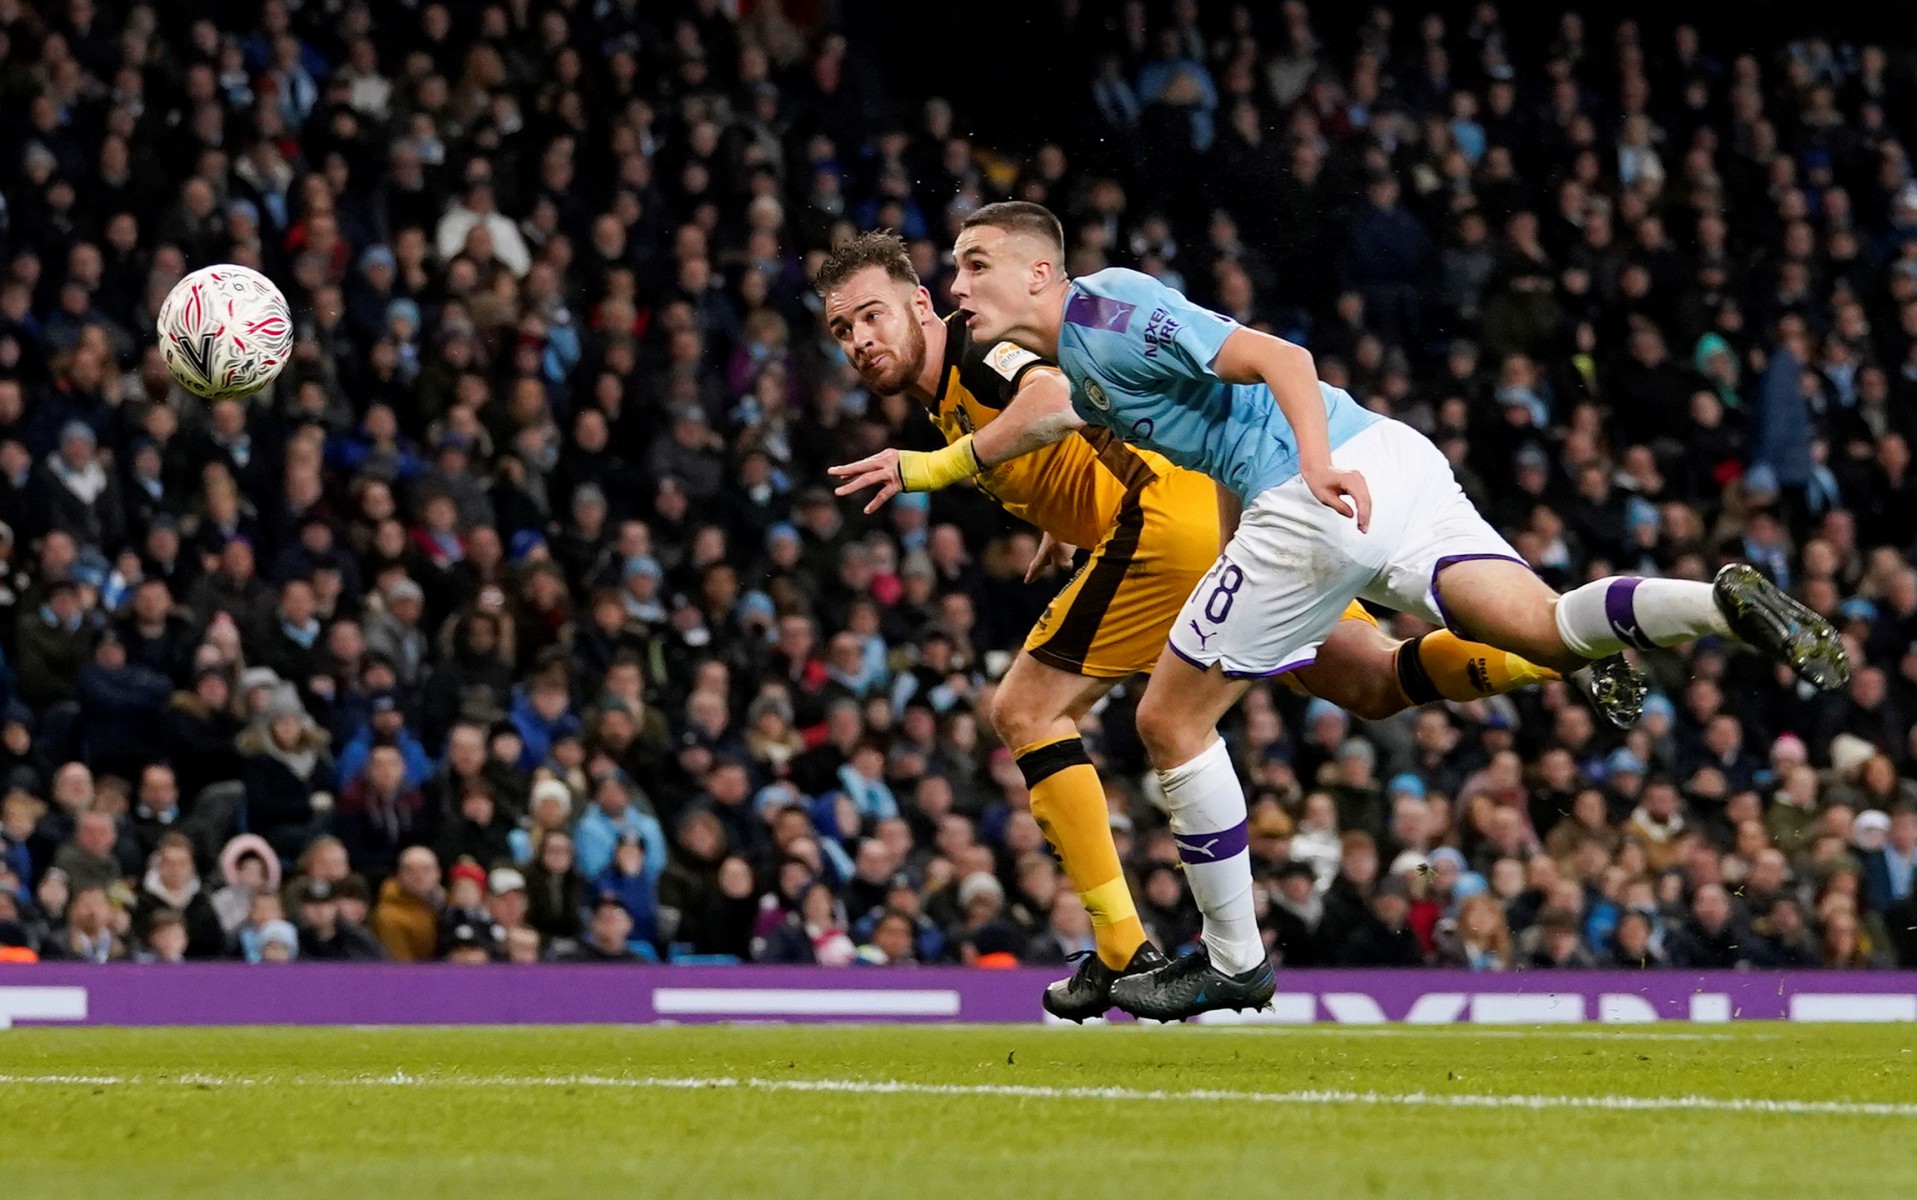 , Port Vale striker Tom Pope lives up to his promise as he scores in FA Cup clash with Man City after slating Stones